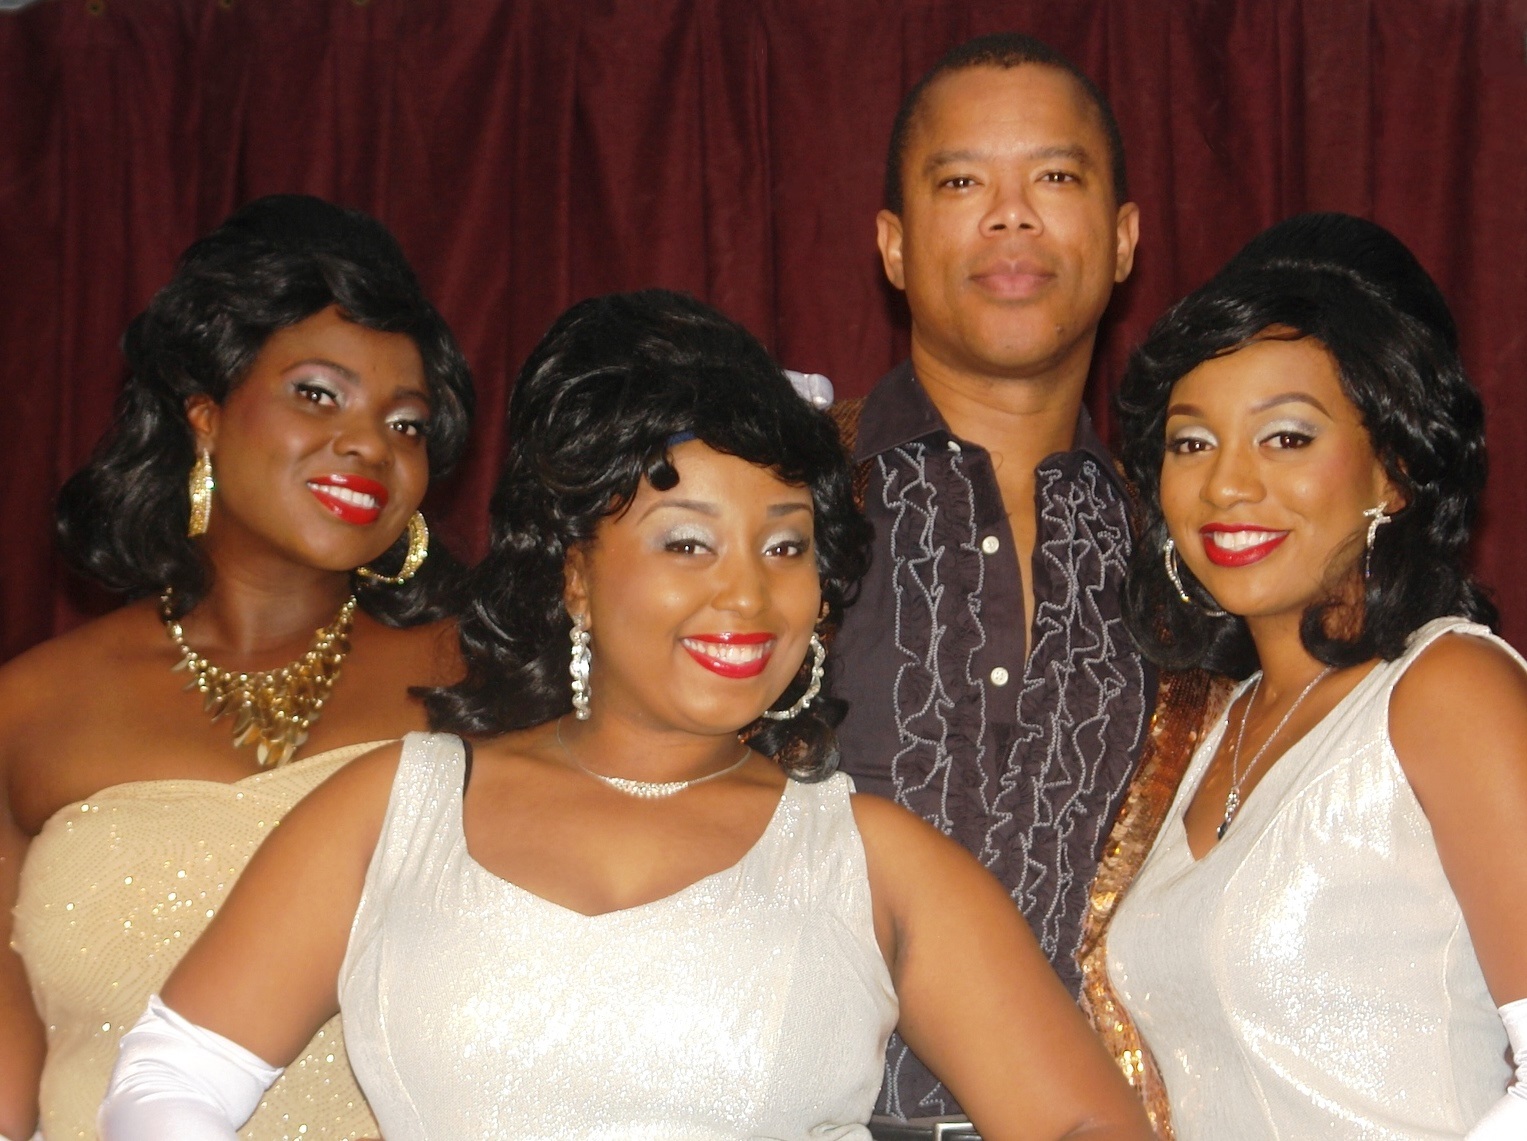 Part of the 'Dreamgirls' cast